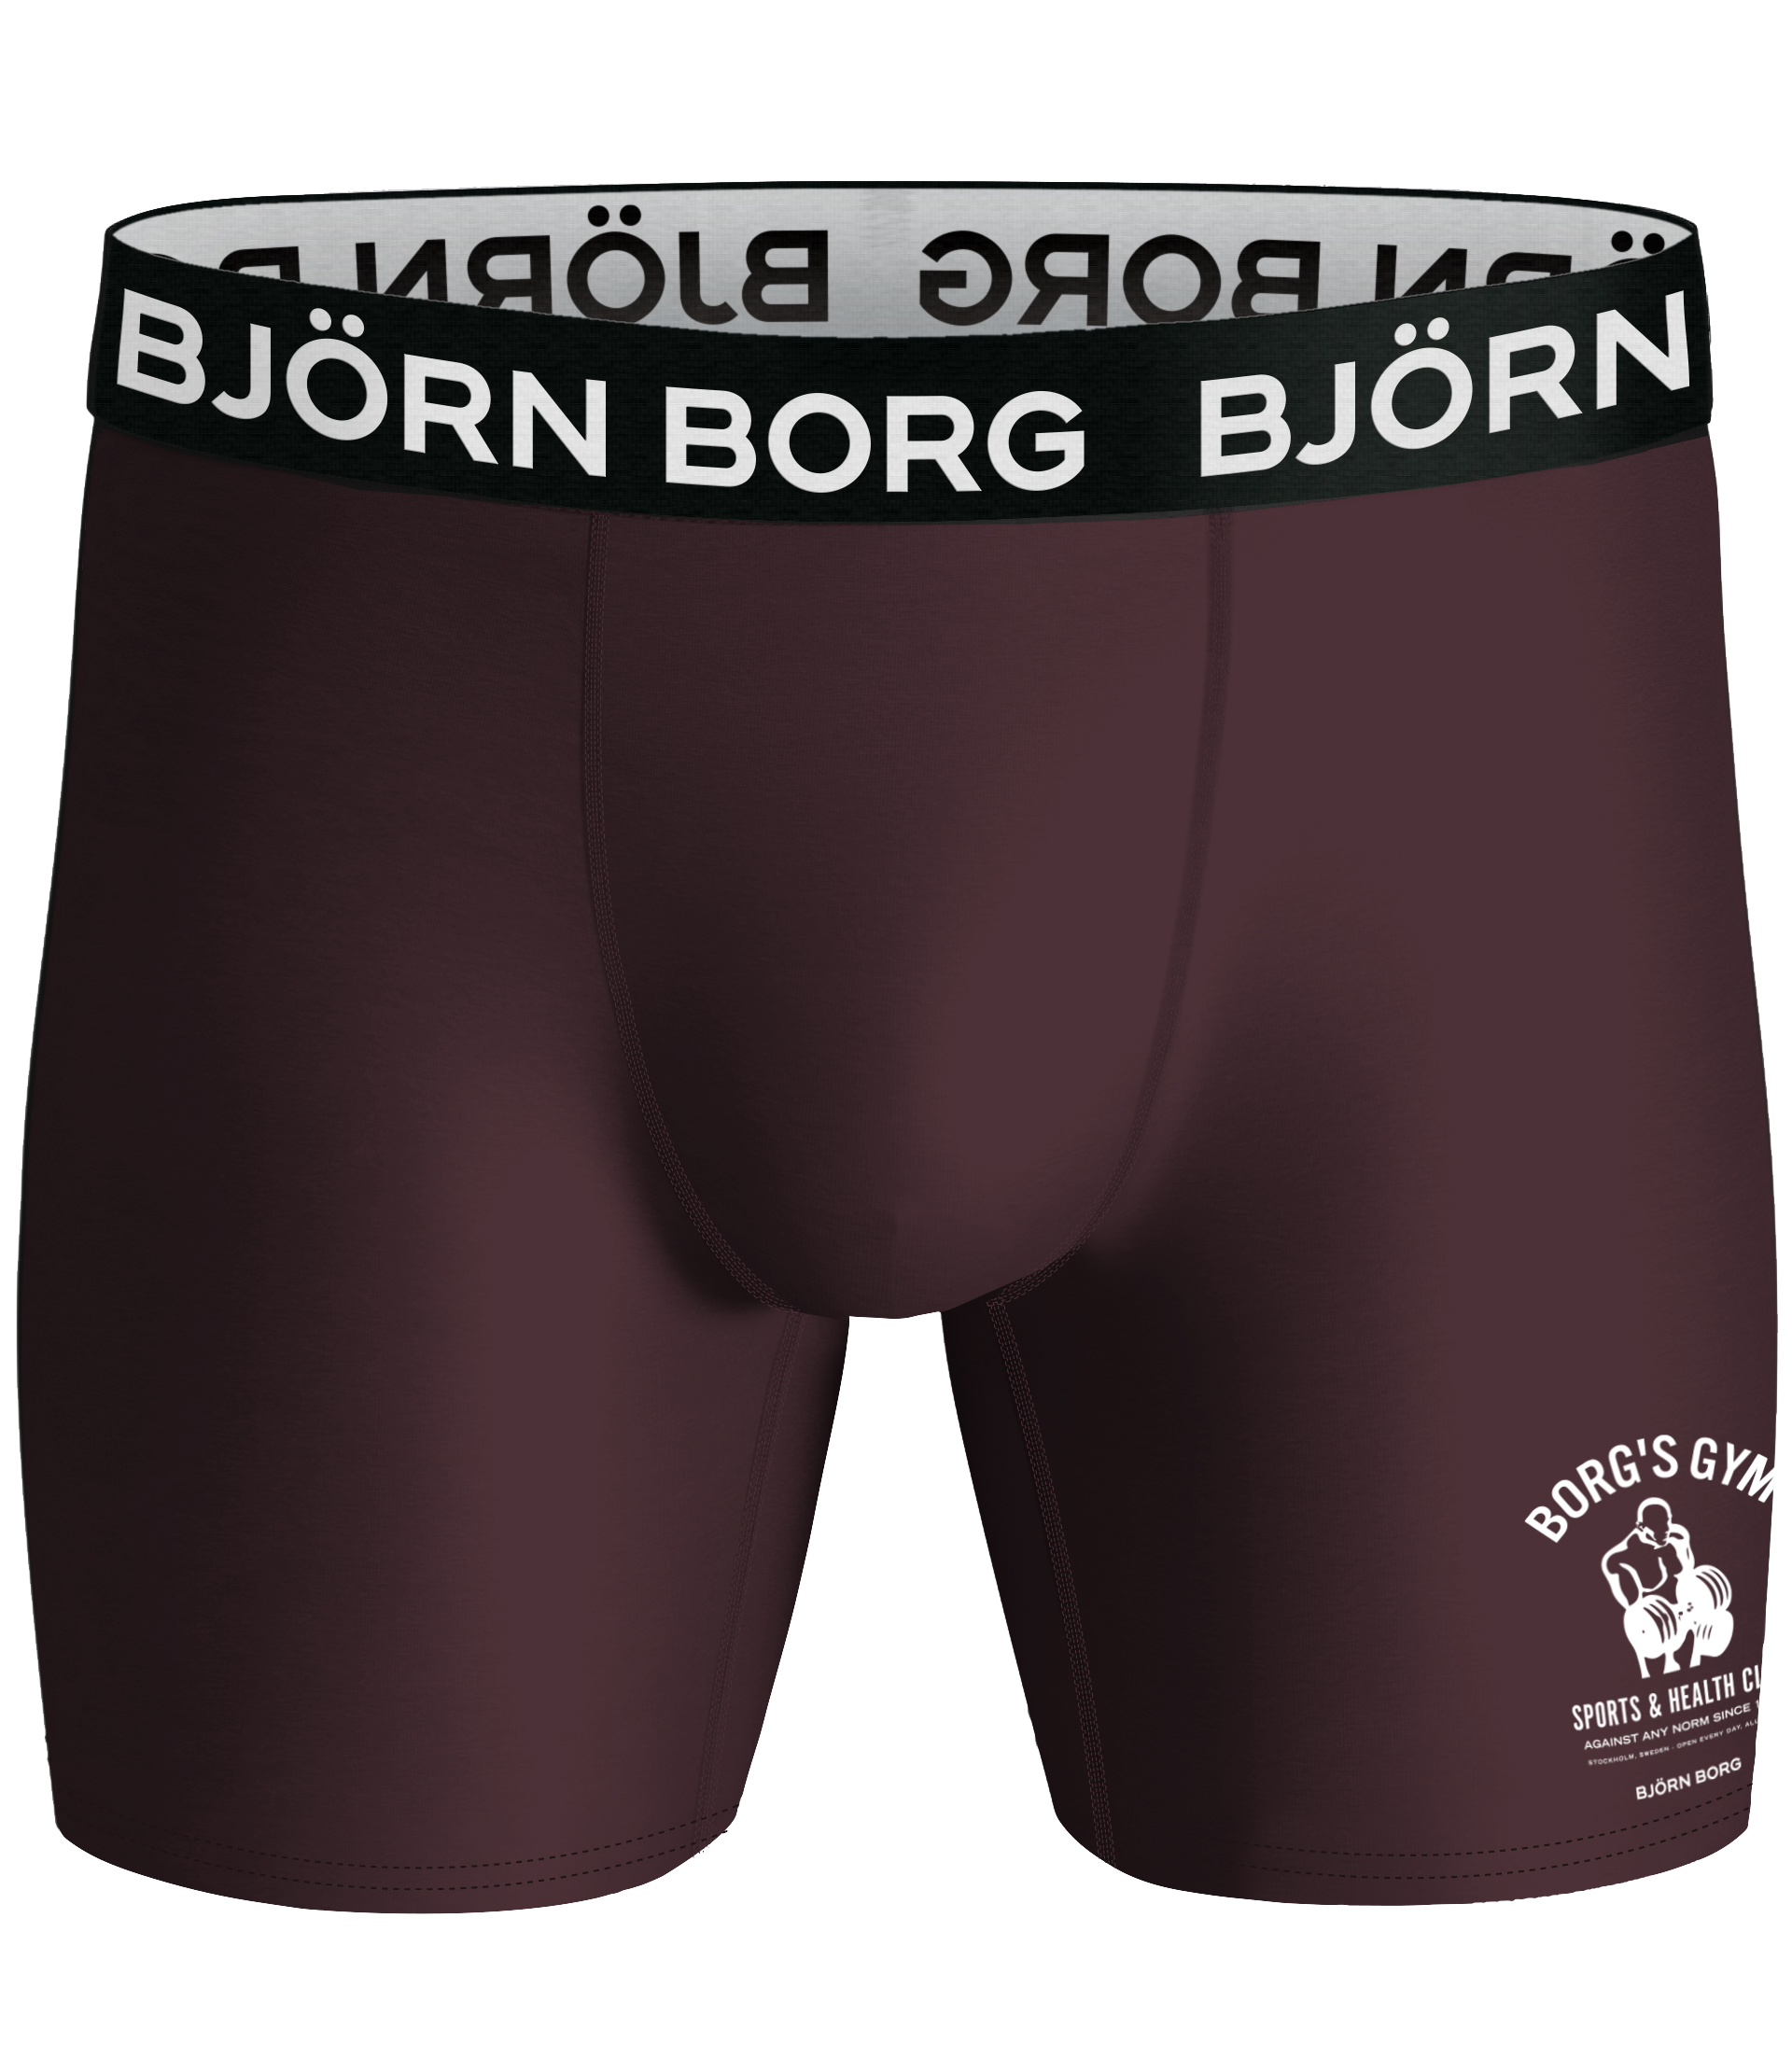 Björn Borg Performance Boxer 2 Pack - Black / Red – Trunks and Boxers